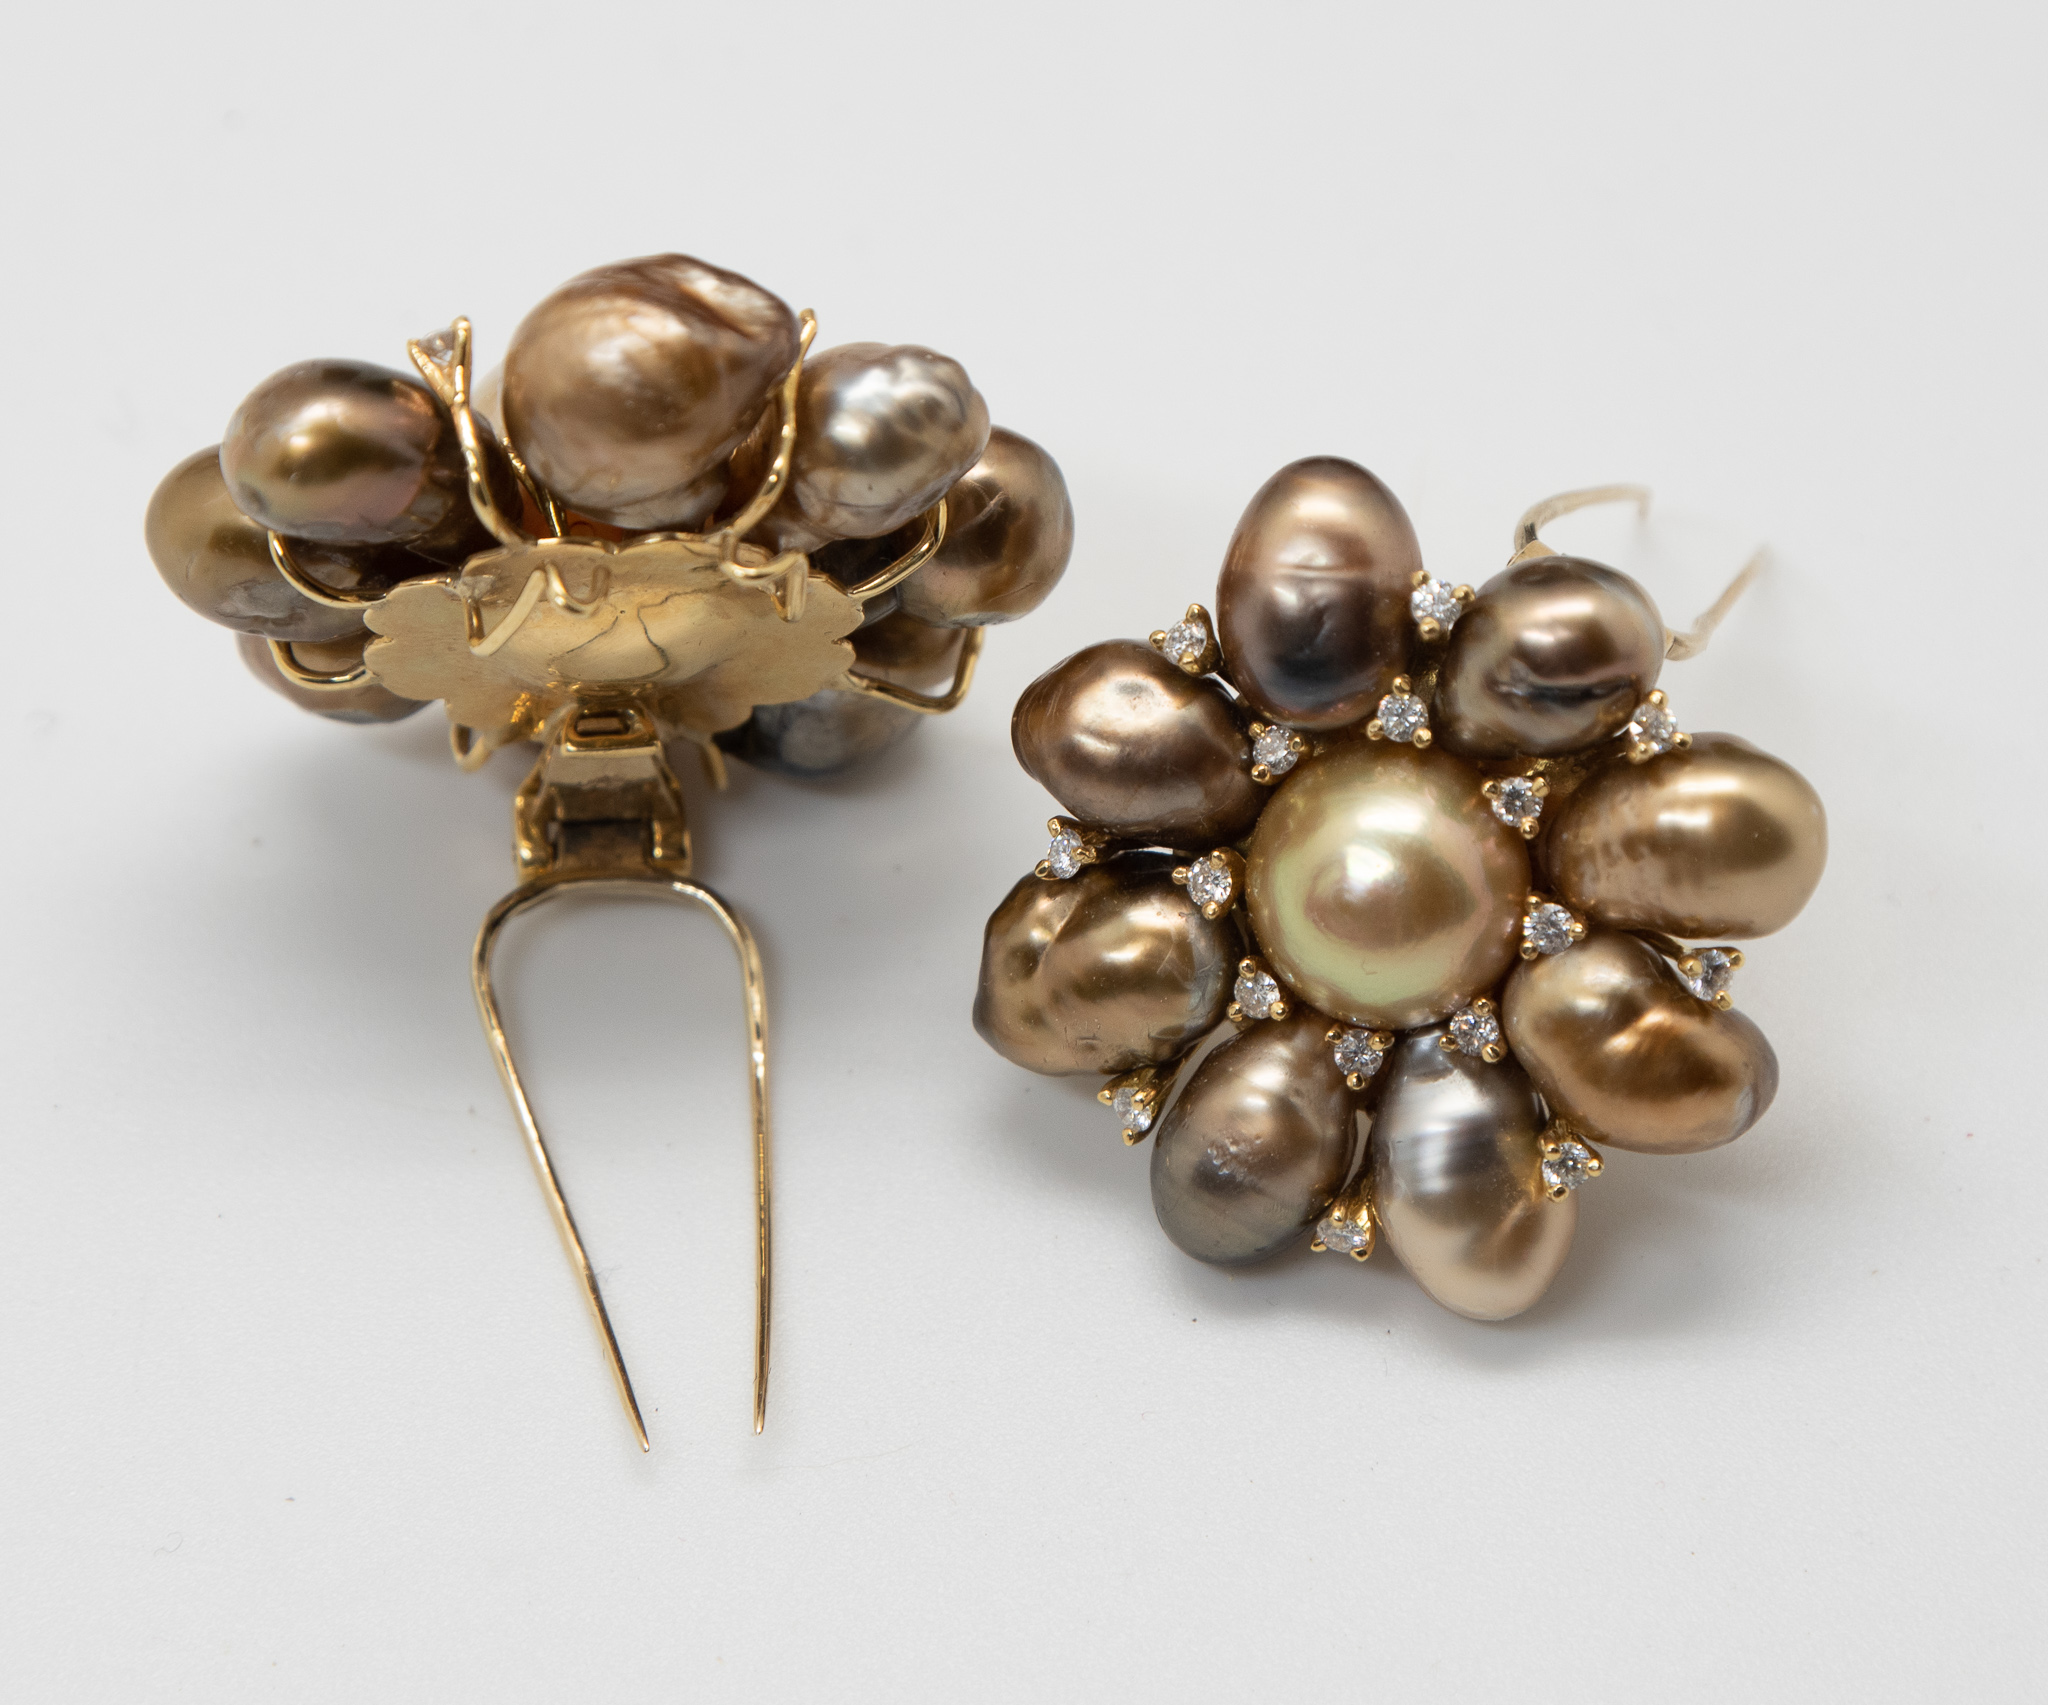 A pair of Tahitian pearl and diamond brooches showing one from the front and one from the back